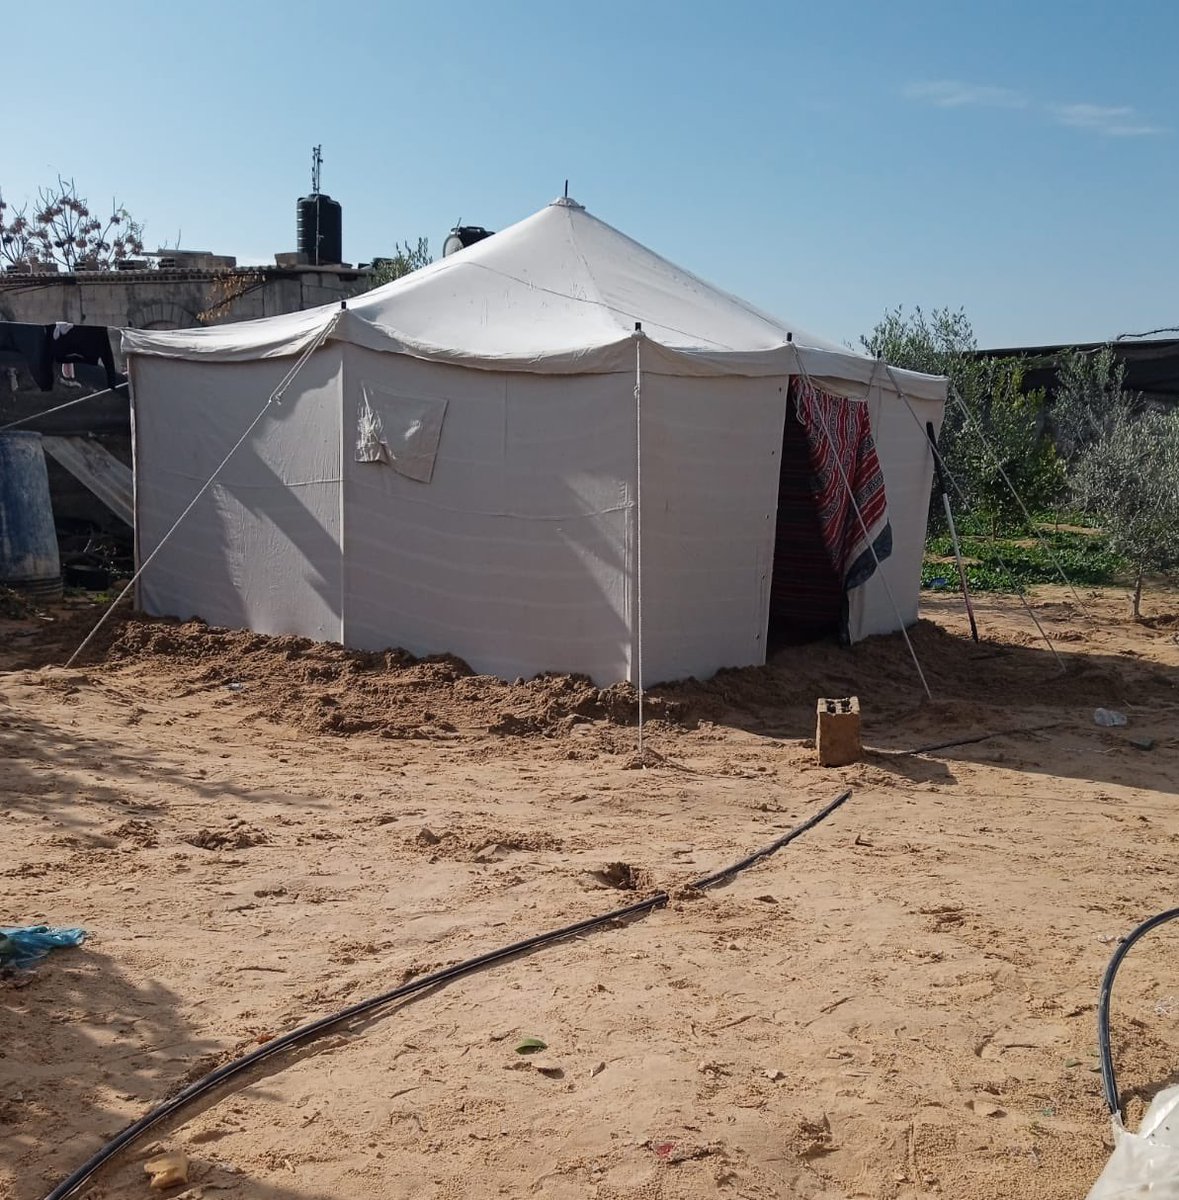 My family still lives in a tent after our home was destroyed by IOF attacks in Khan Younis City‼️

You can’t imagine the hardships they face every day trying to provide basic needs. 

Help us change that in any way possible 🇵🇸

Please donate, share ⬇️

gofund.me/738797a7